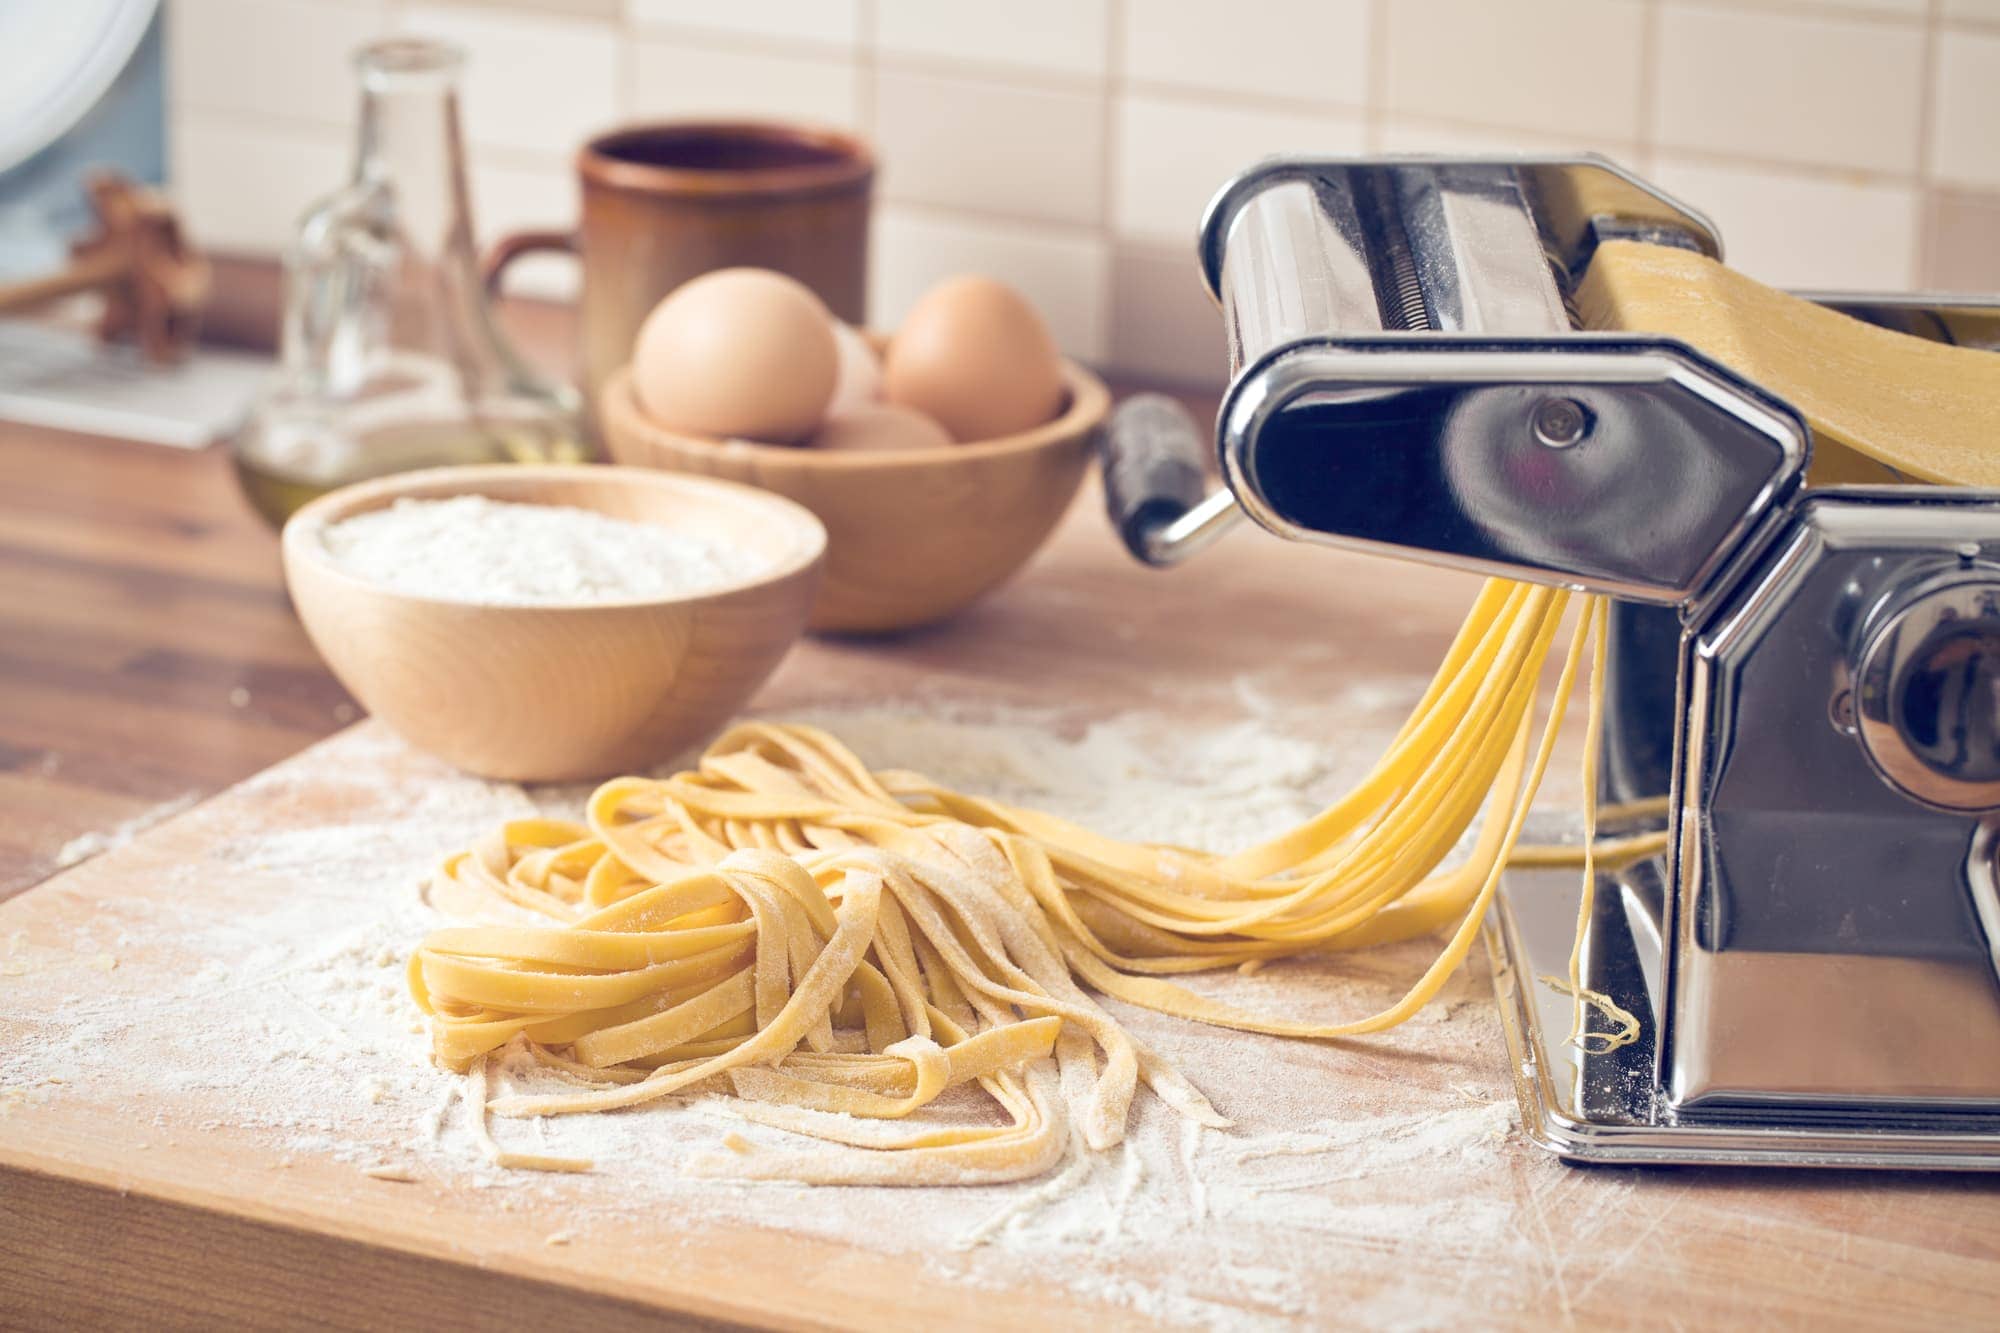 How to Make Pasta: A Guide to Making Fresh Pasta From Scratch